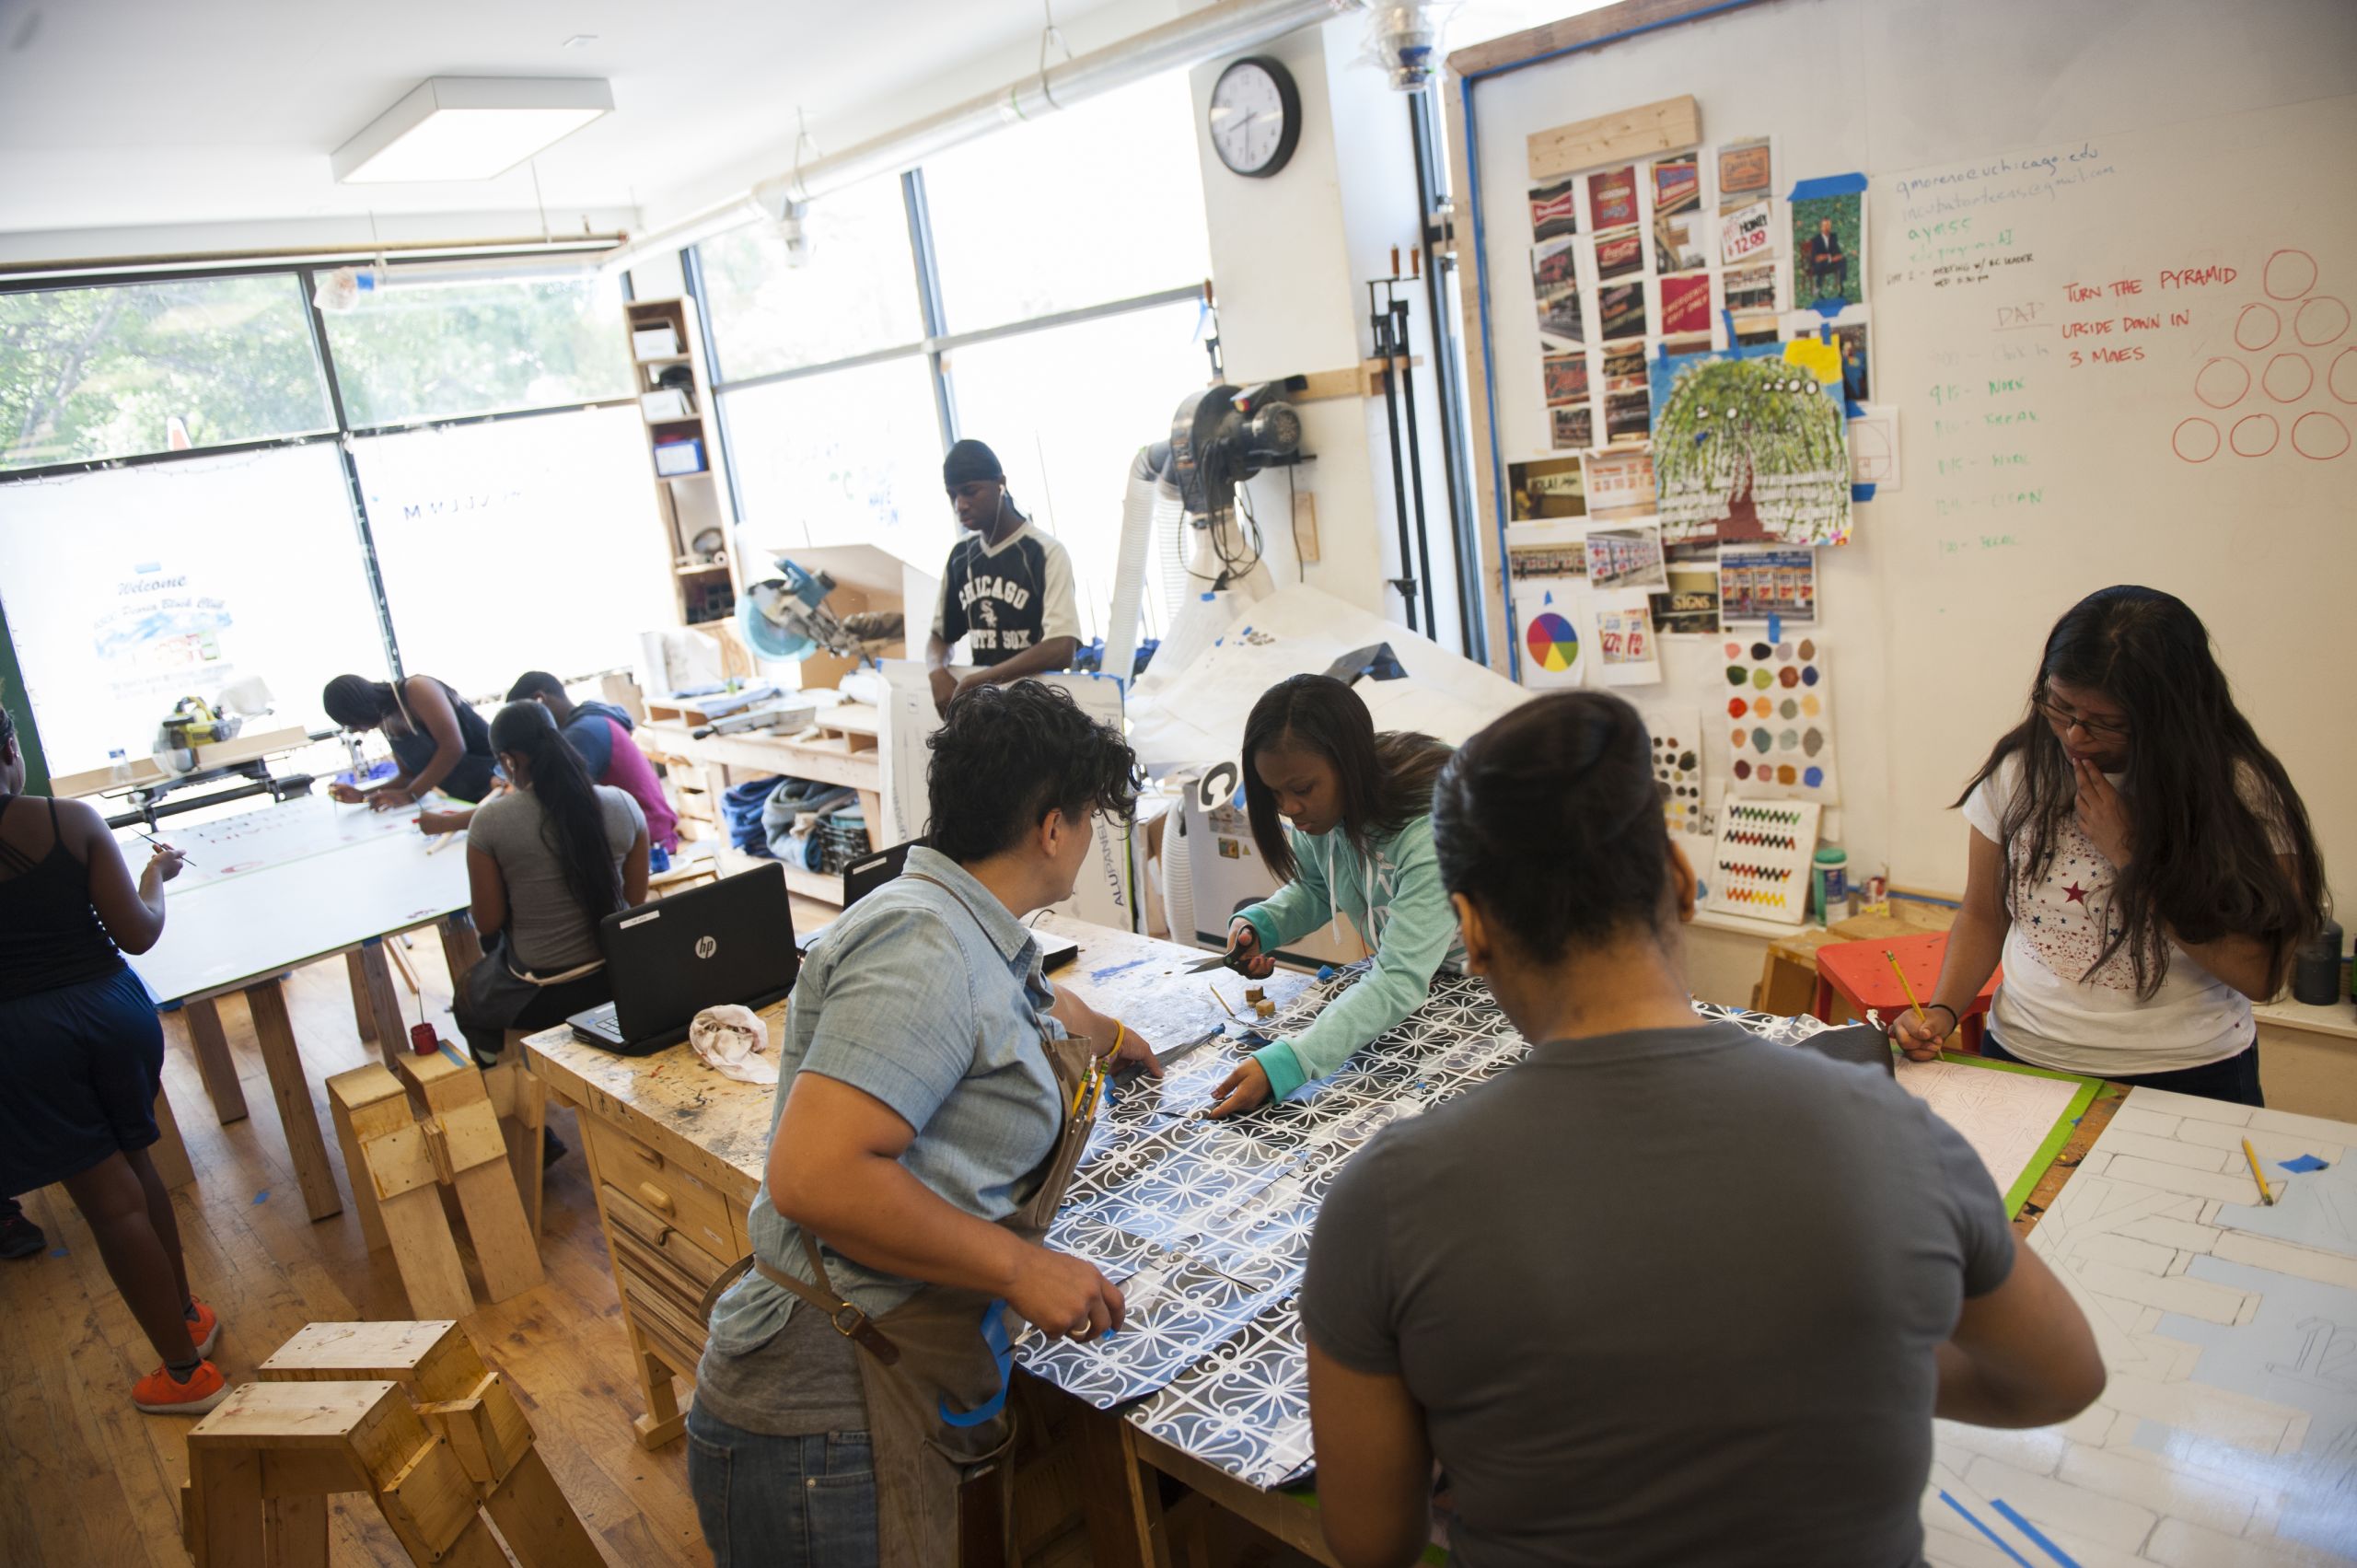 Young people work together in a studio, where art hangs on whiteboards.